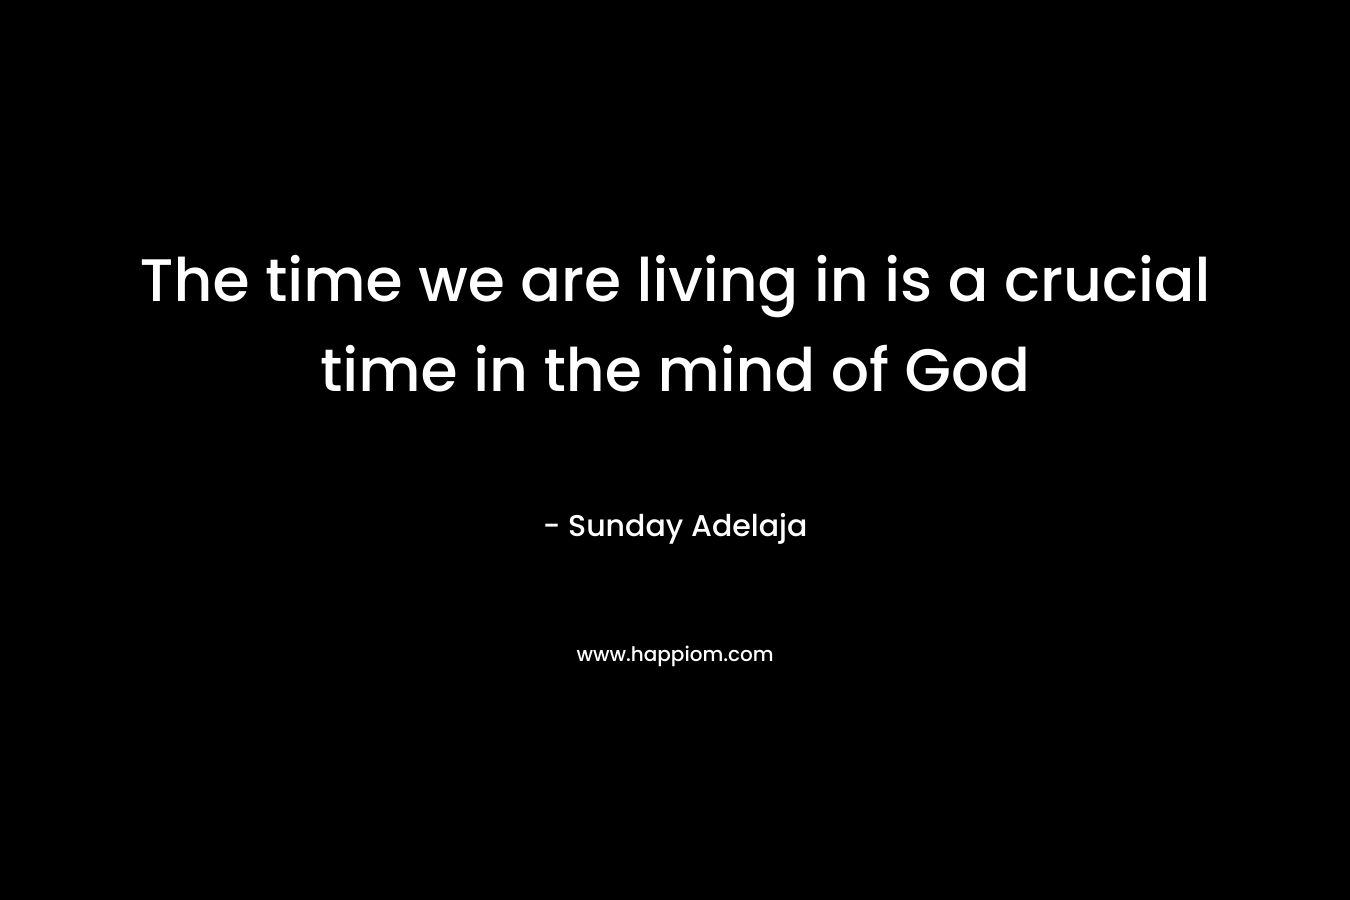 The time we are living in is a crucial time in the mind of God